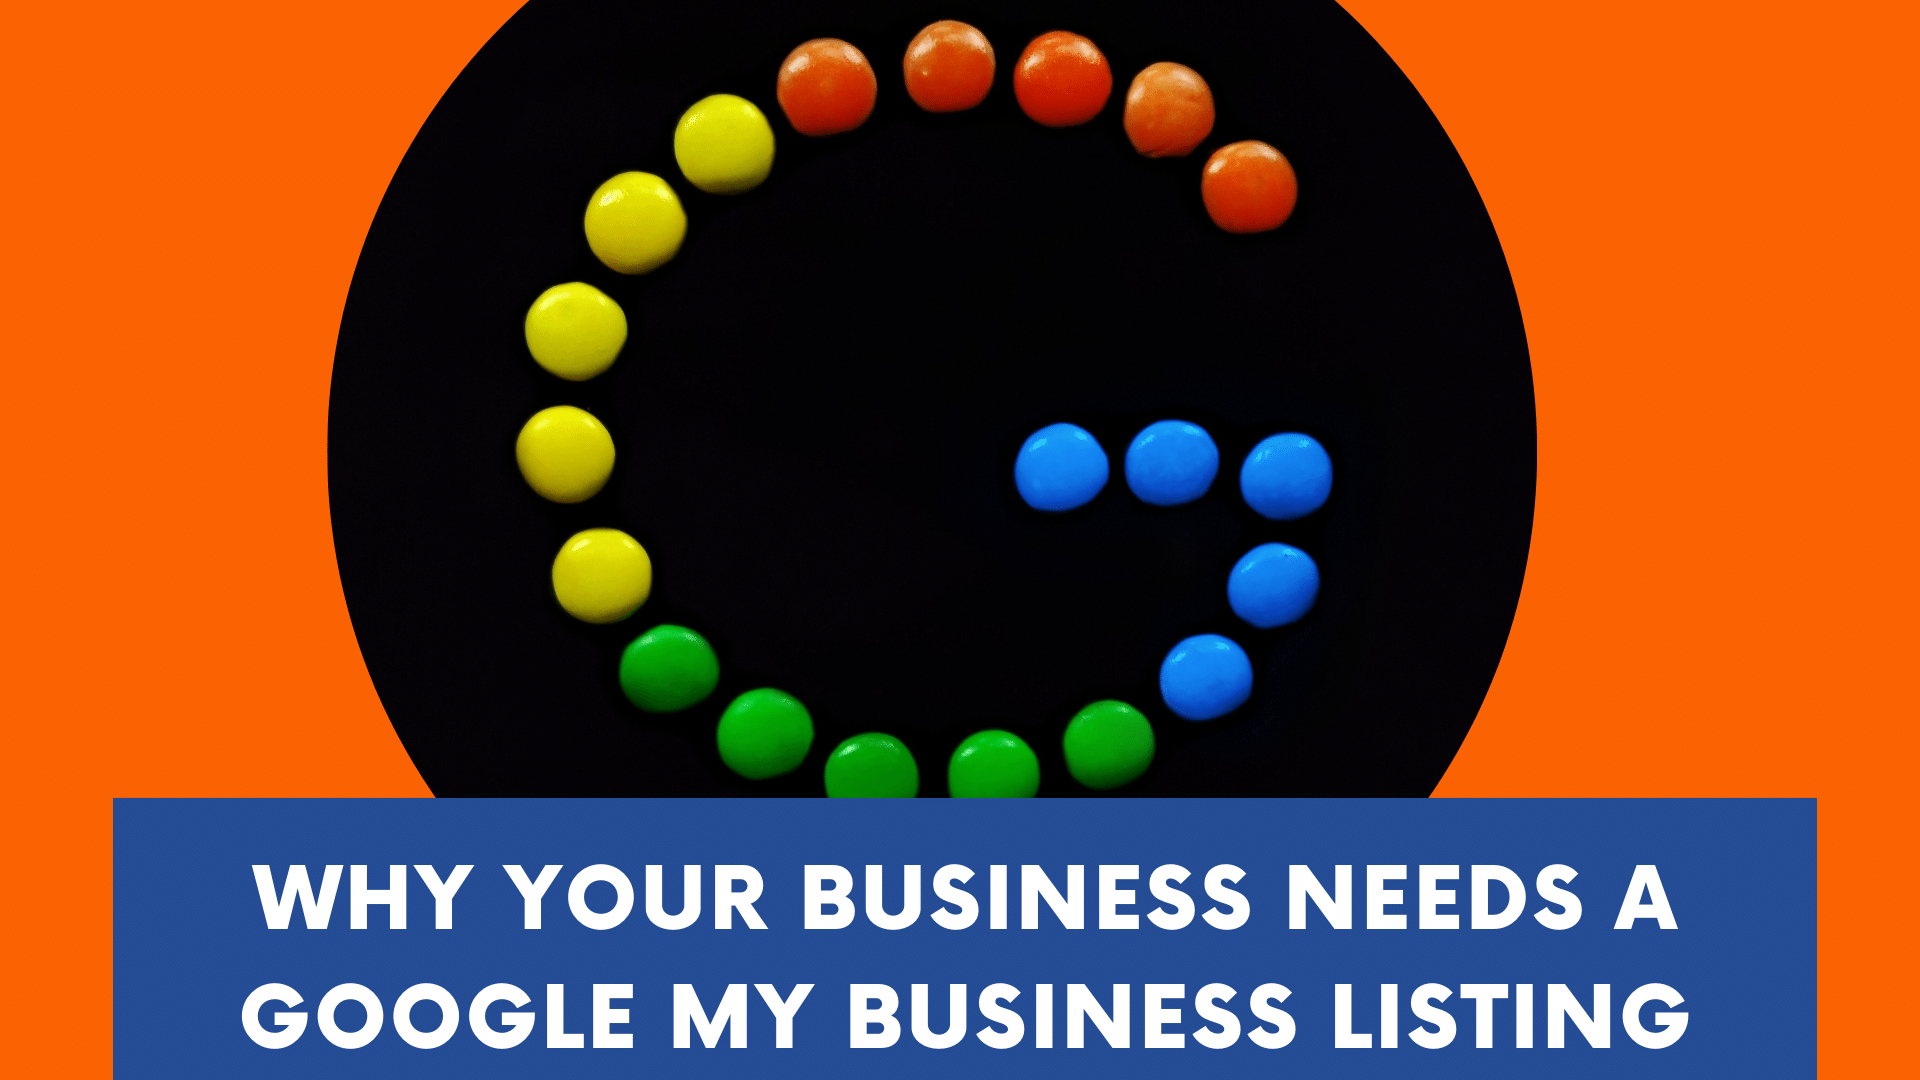 Google Business Profile: Why it is Important for Your Business